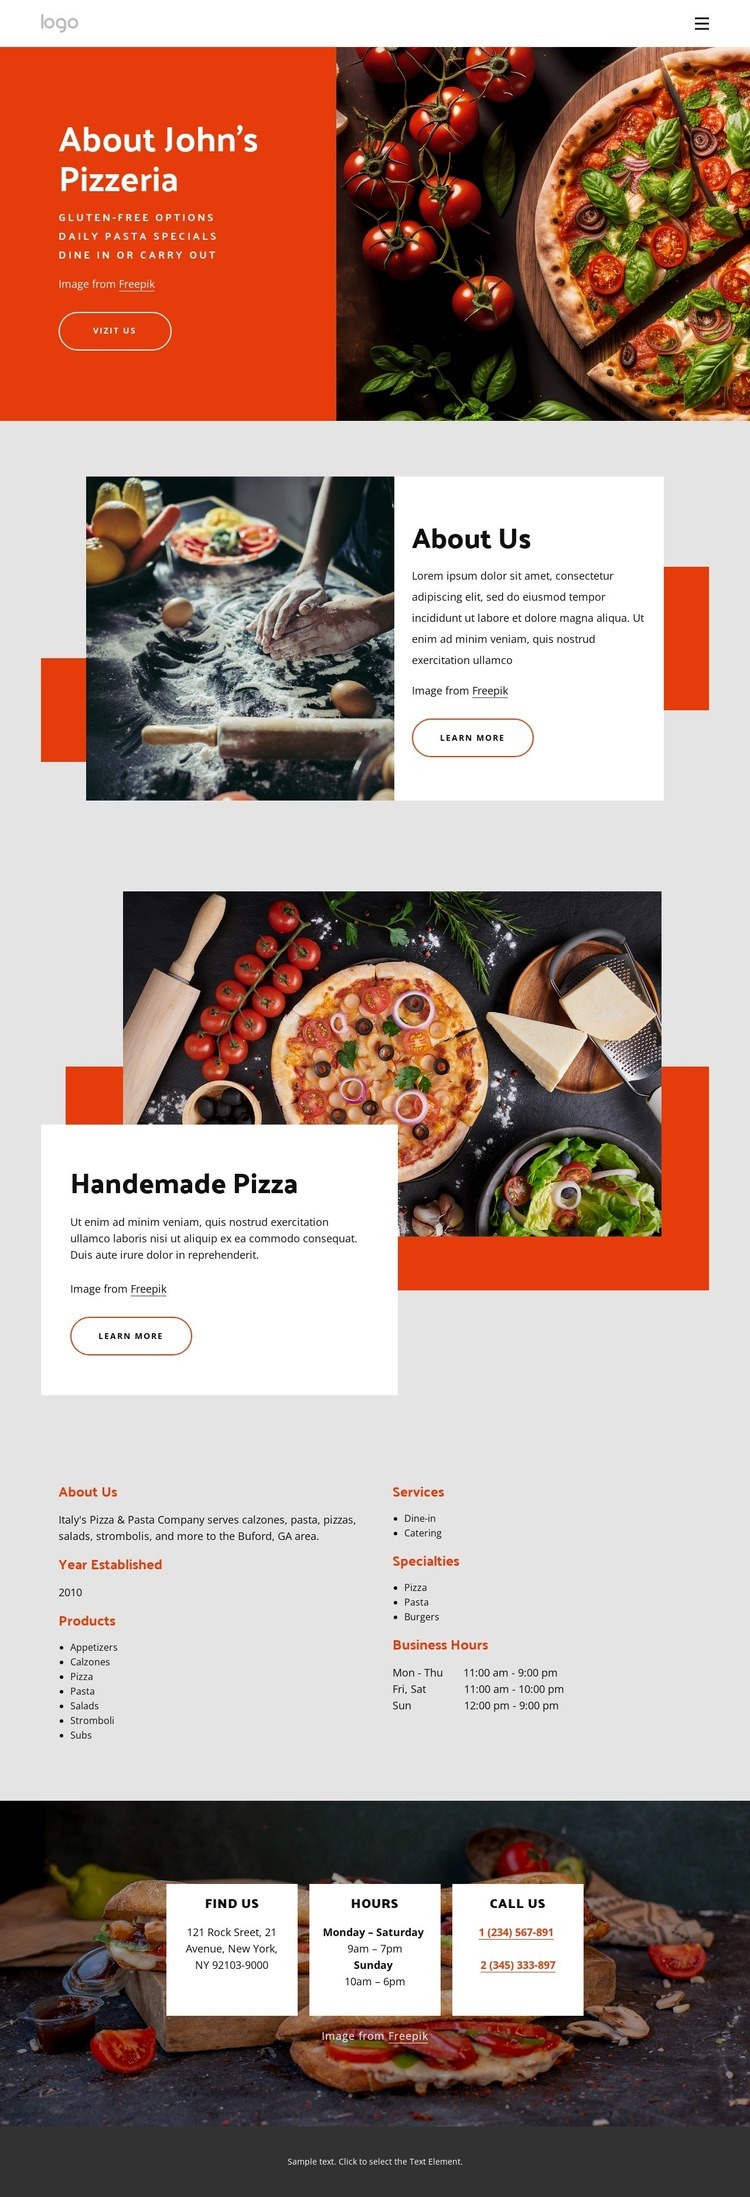 About our pizzeria Web Page Design